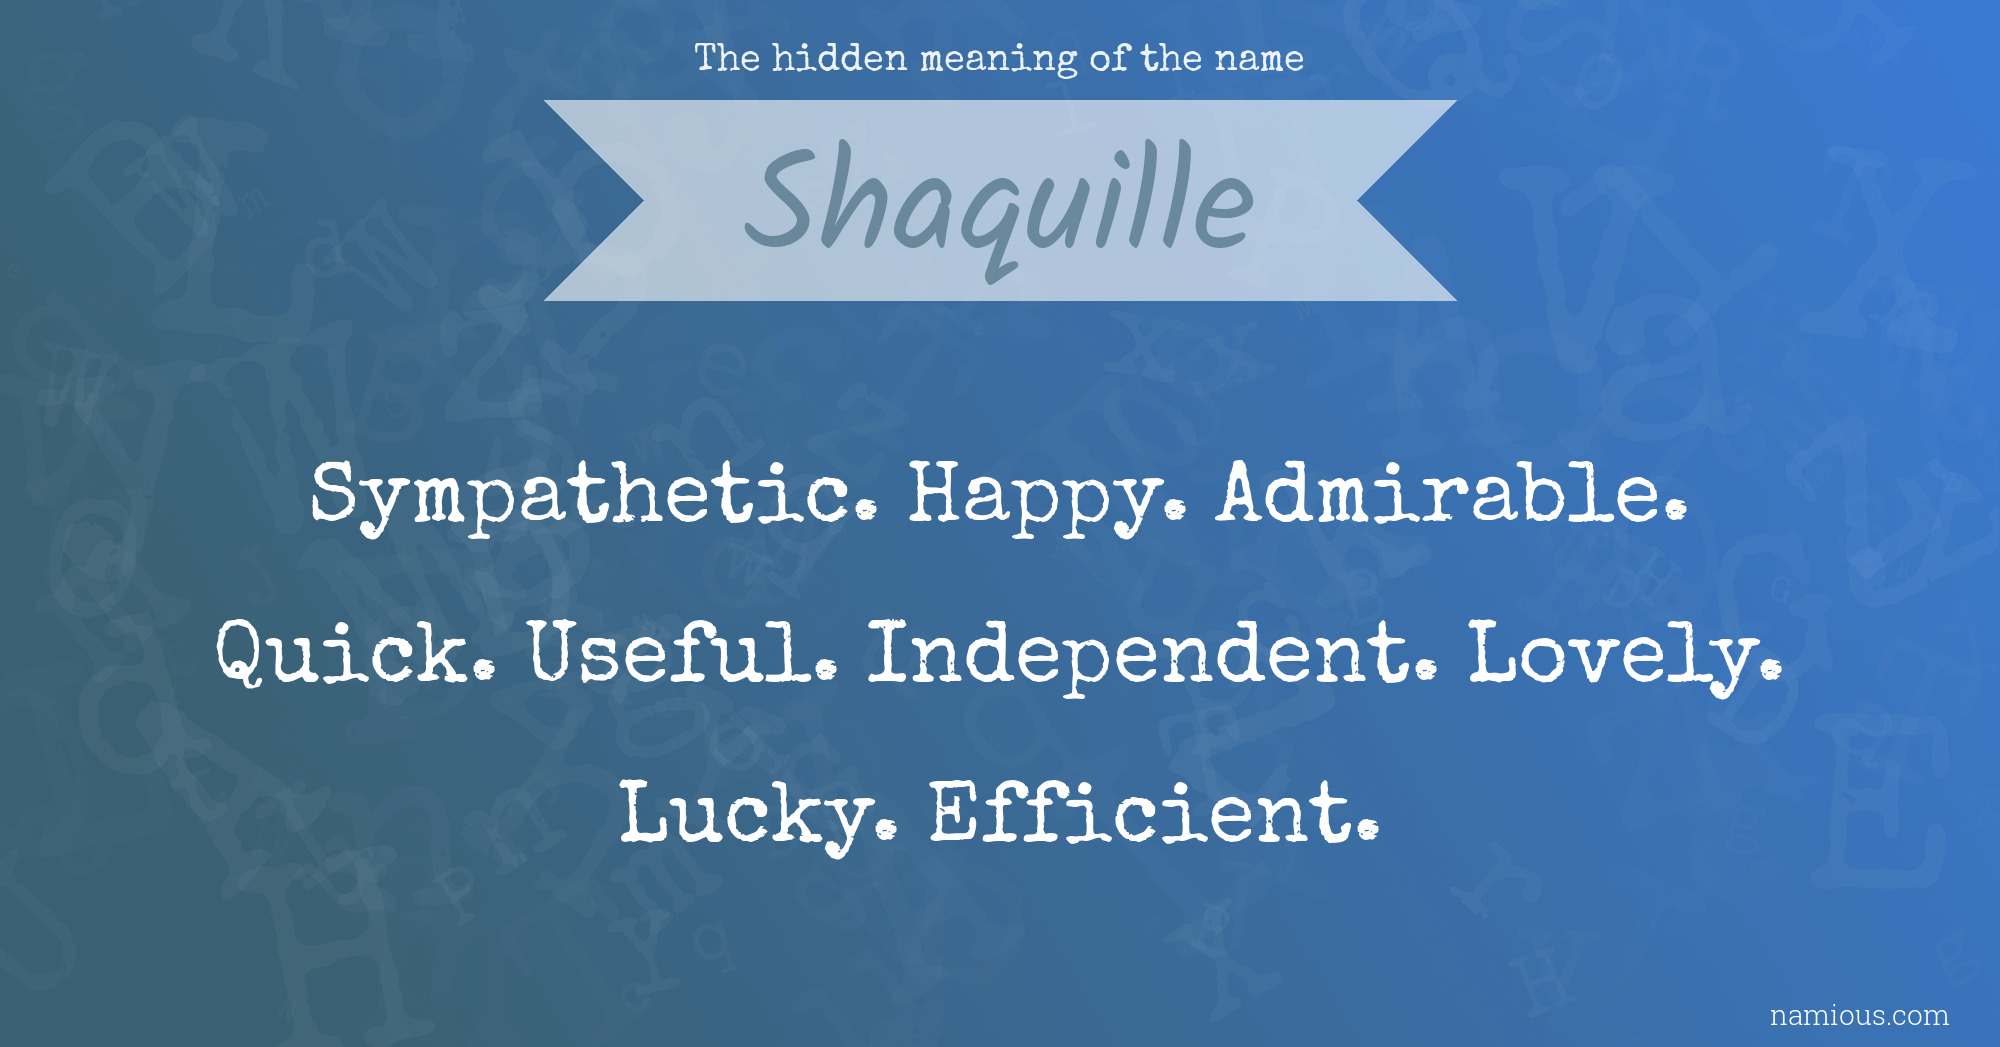 The hidden meaning of the name Shaquille